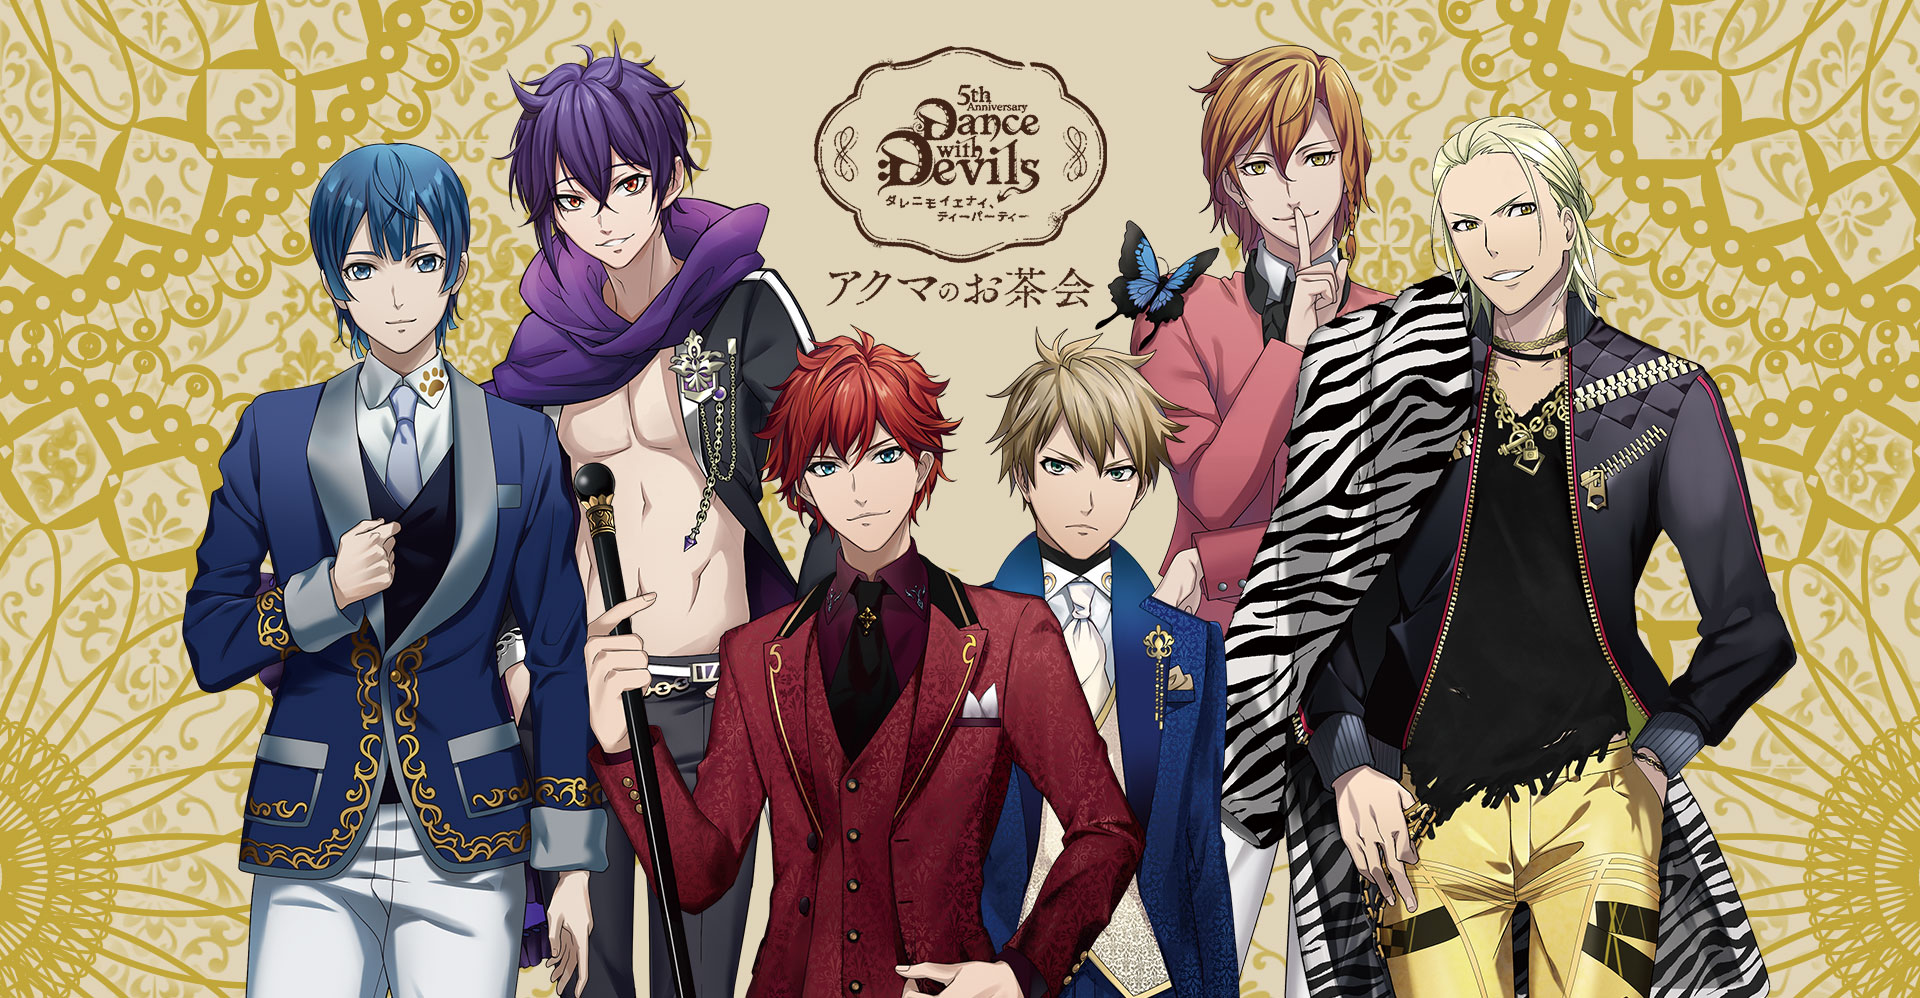 Dance With Devils 5th Anniversary アクマのお茶会 Rejet